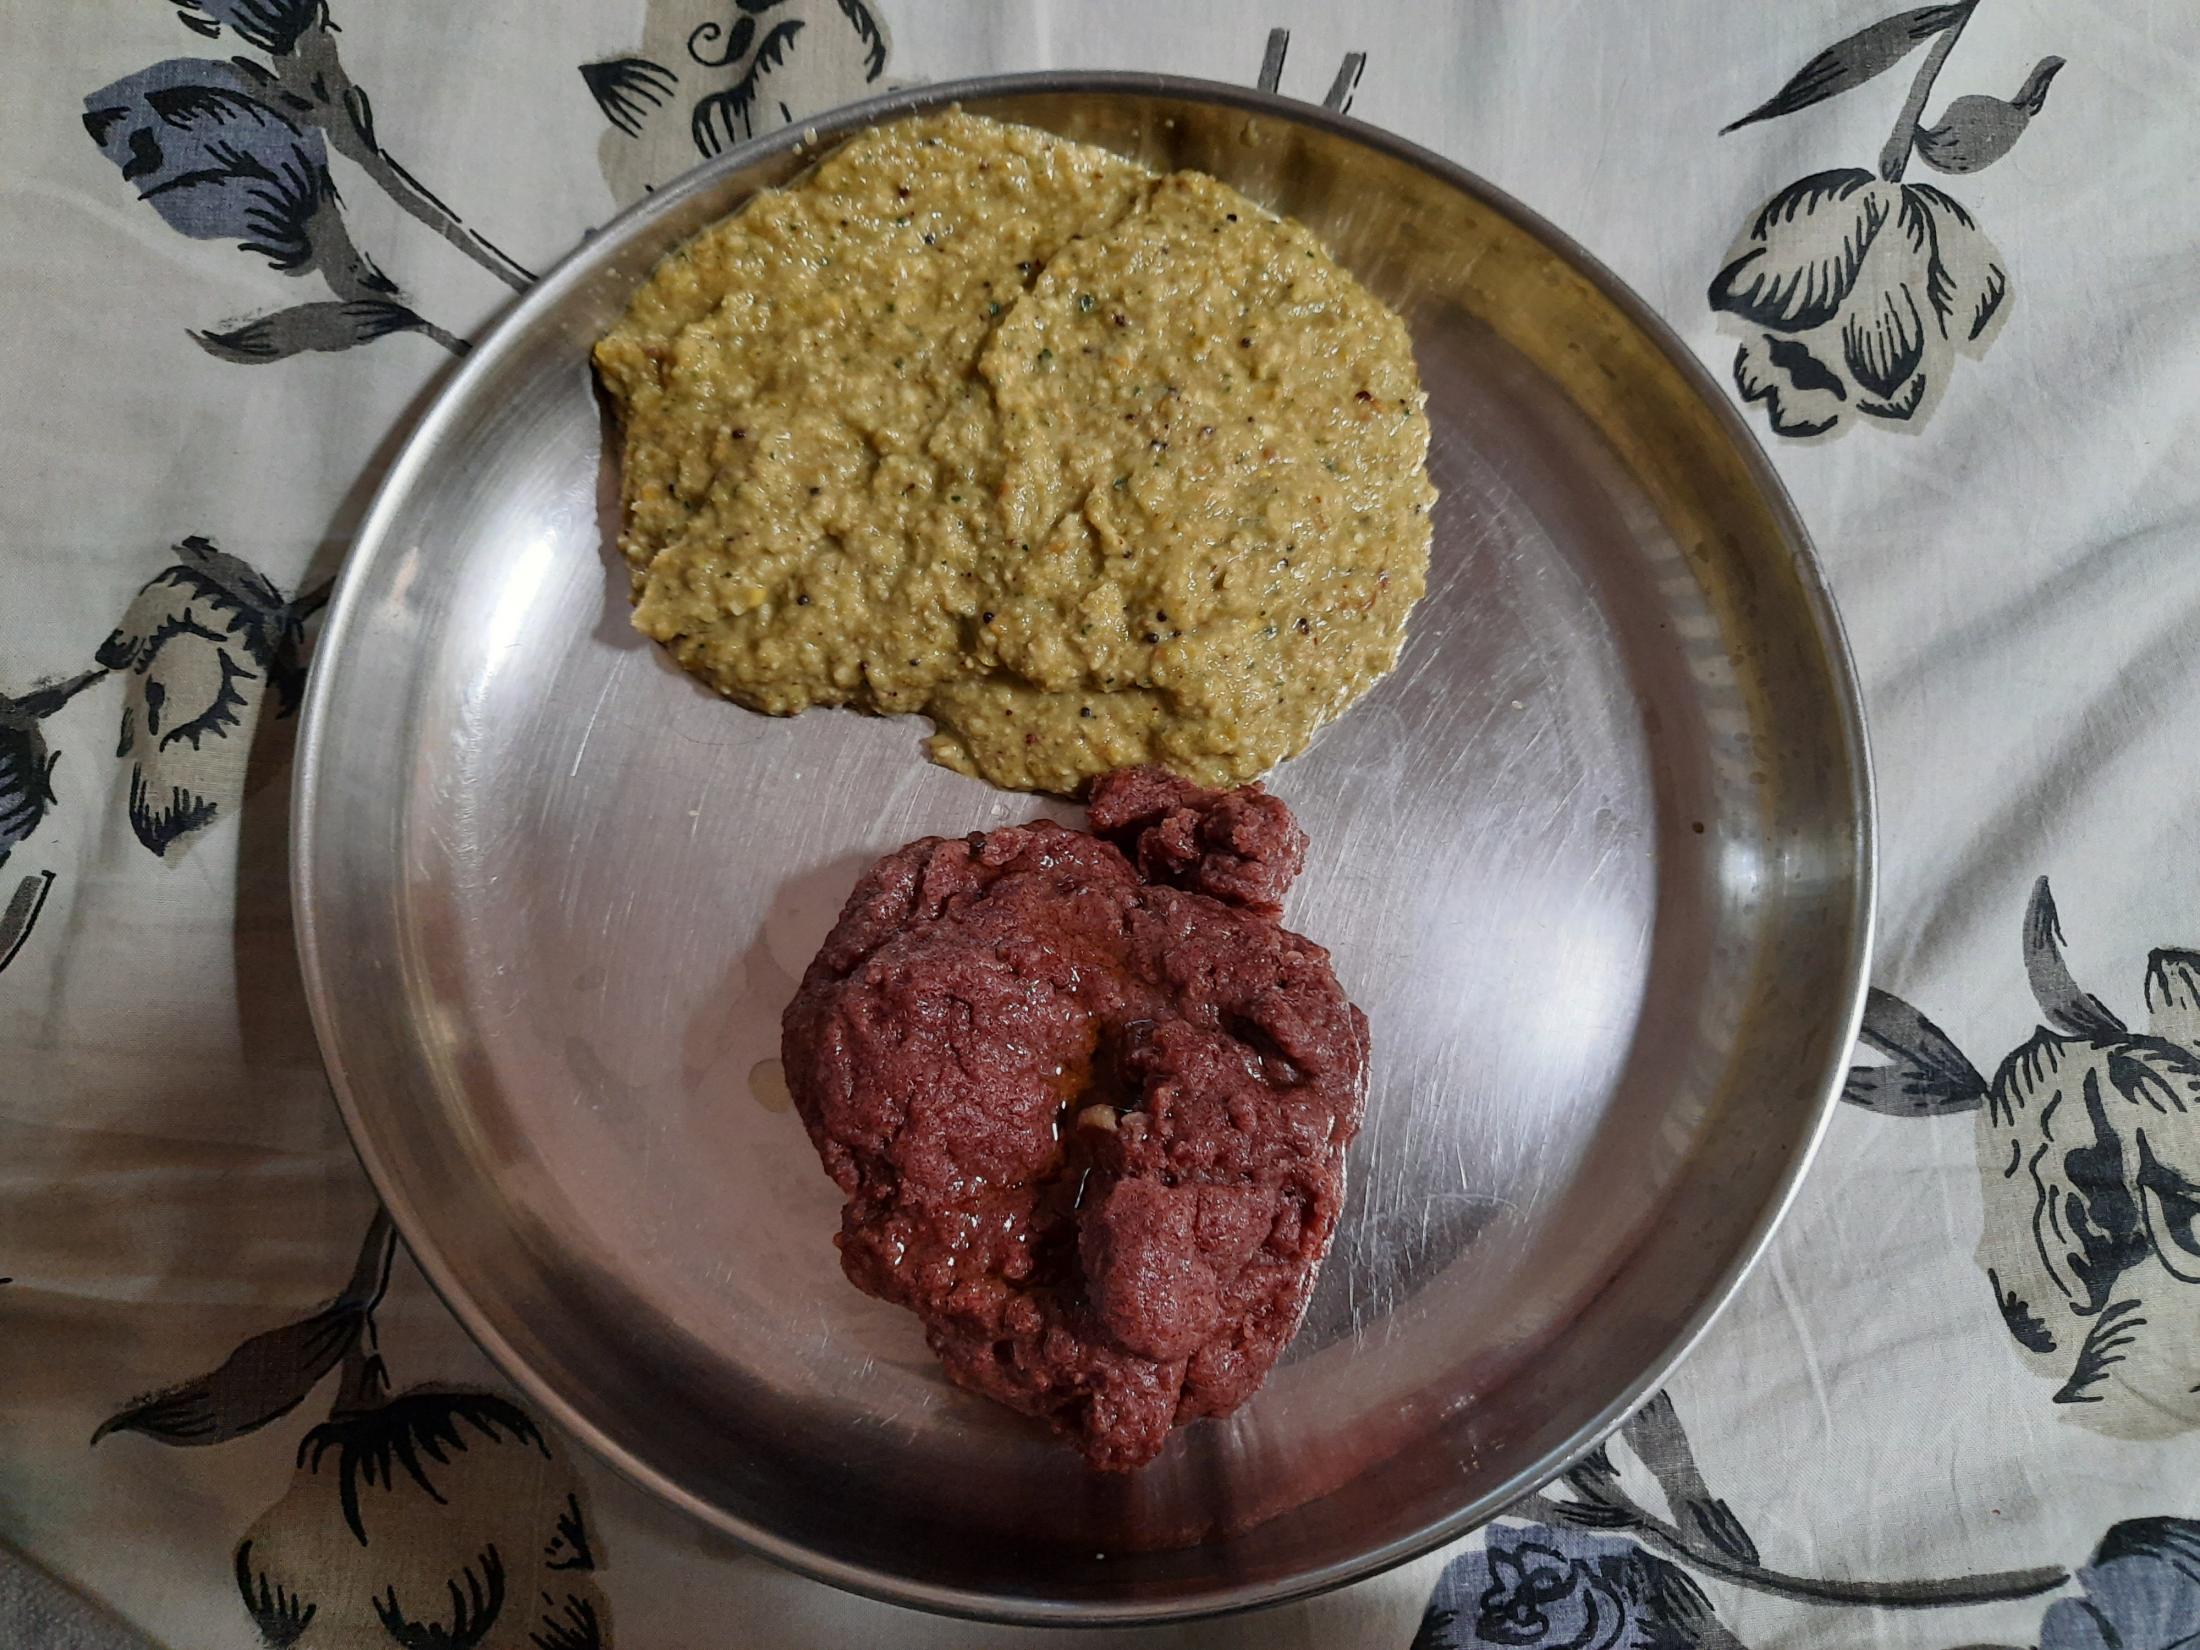  Mum serves me the most nutritional food to give me strength. Nothing beats Ragi. 